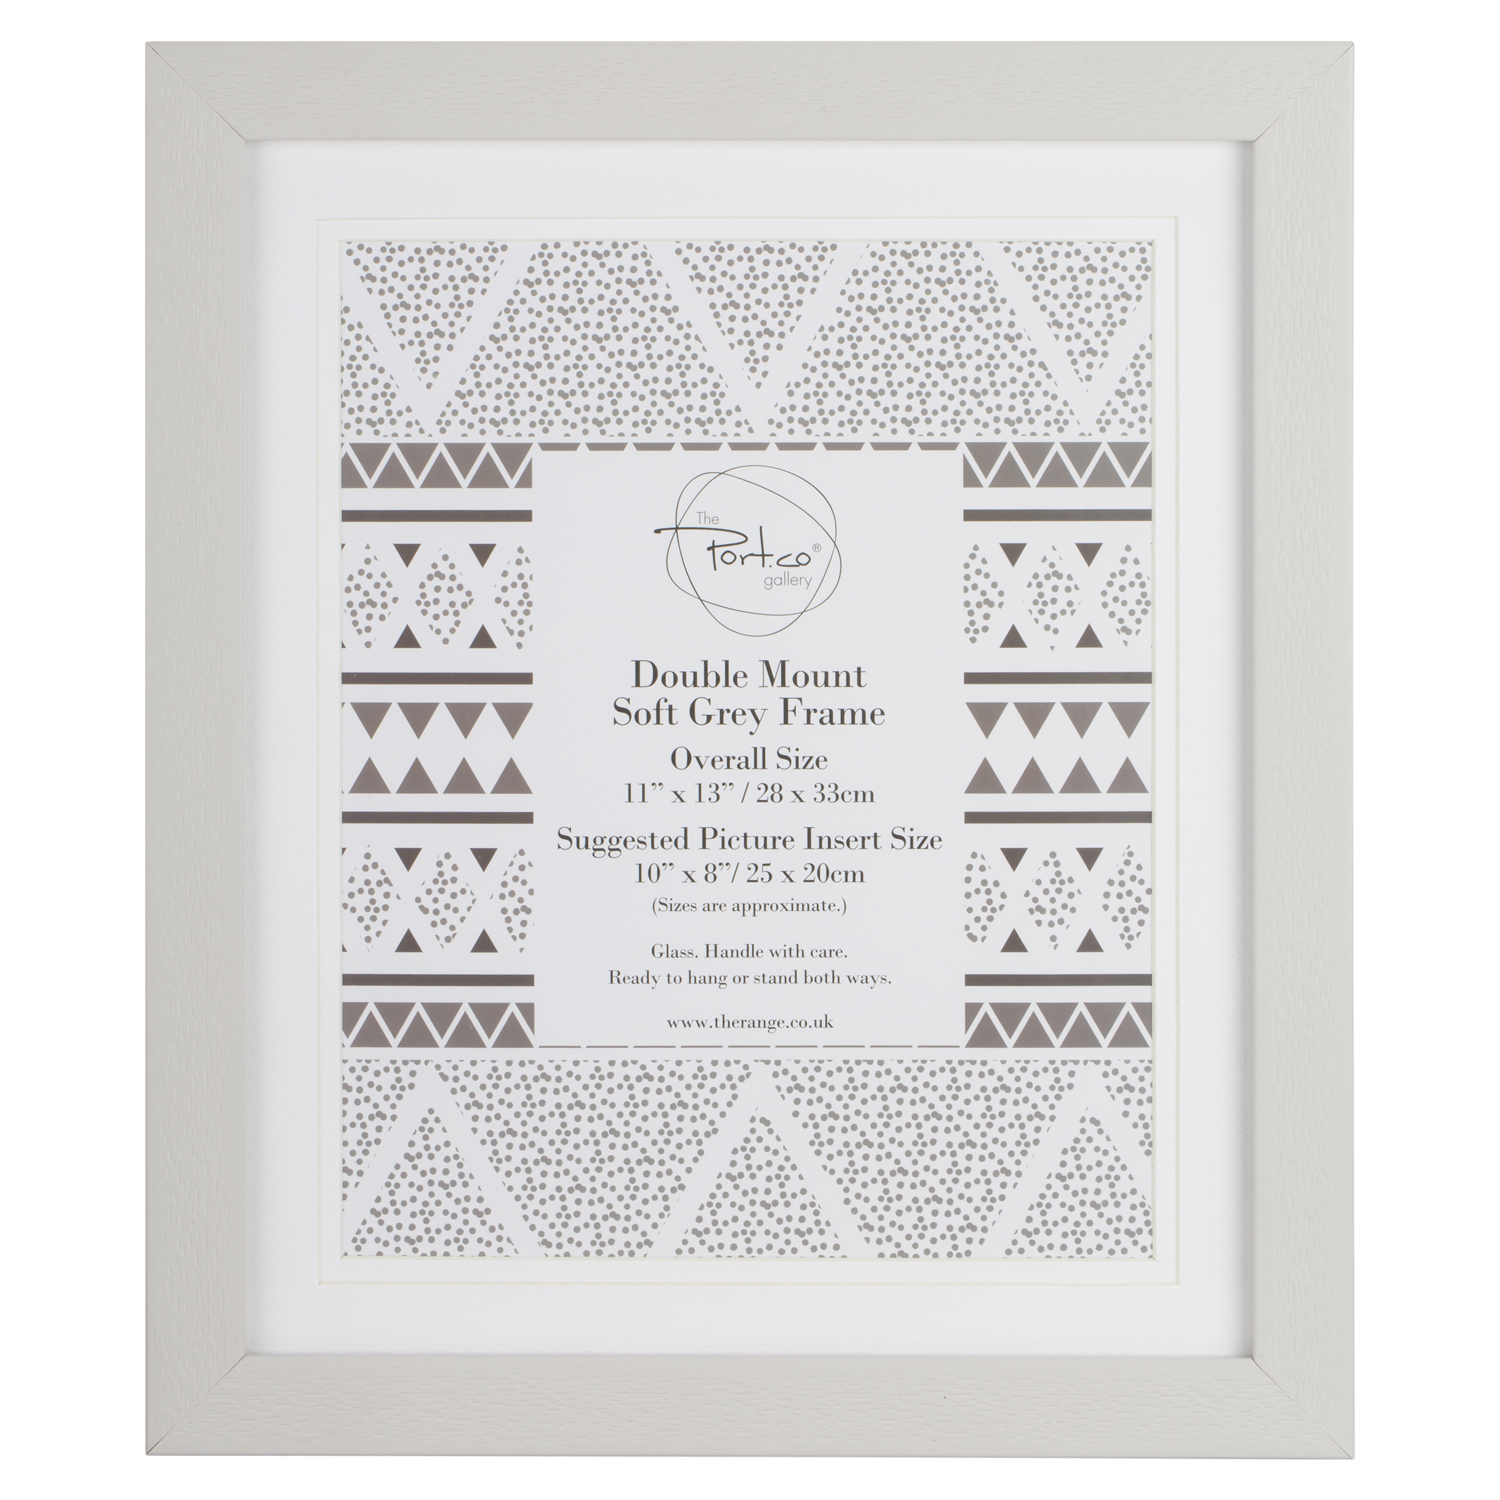 The Port. Co Gallery Soft Grey Photo Frame with 2 Mounts 10 x 8 inch Image 1